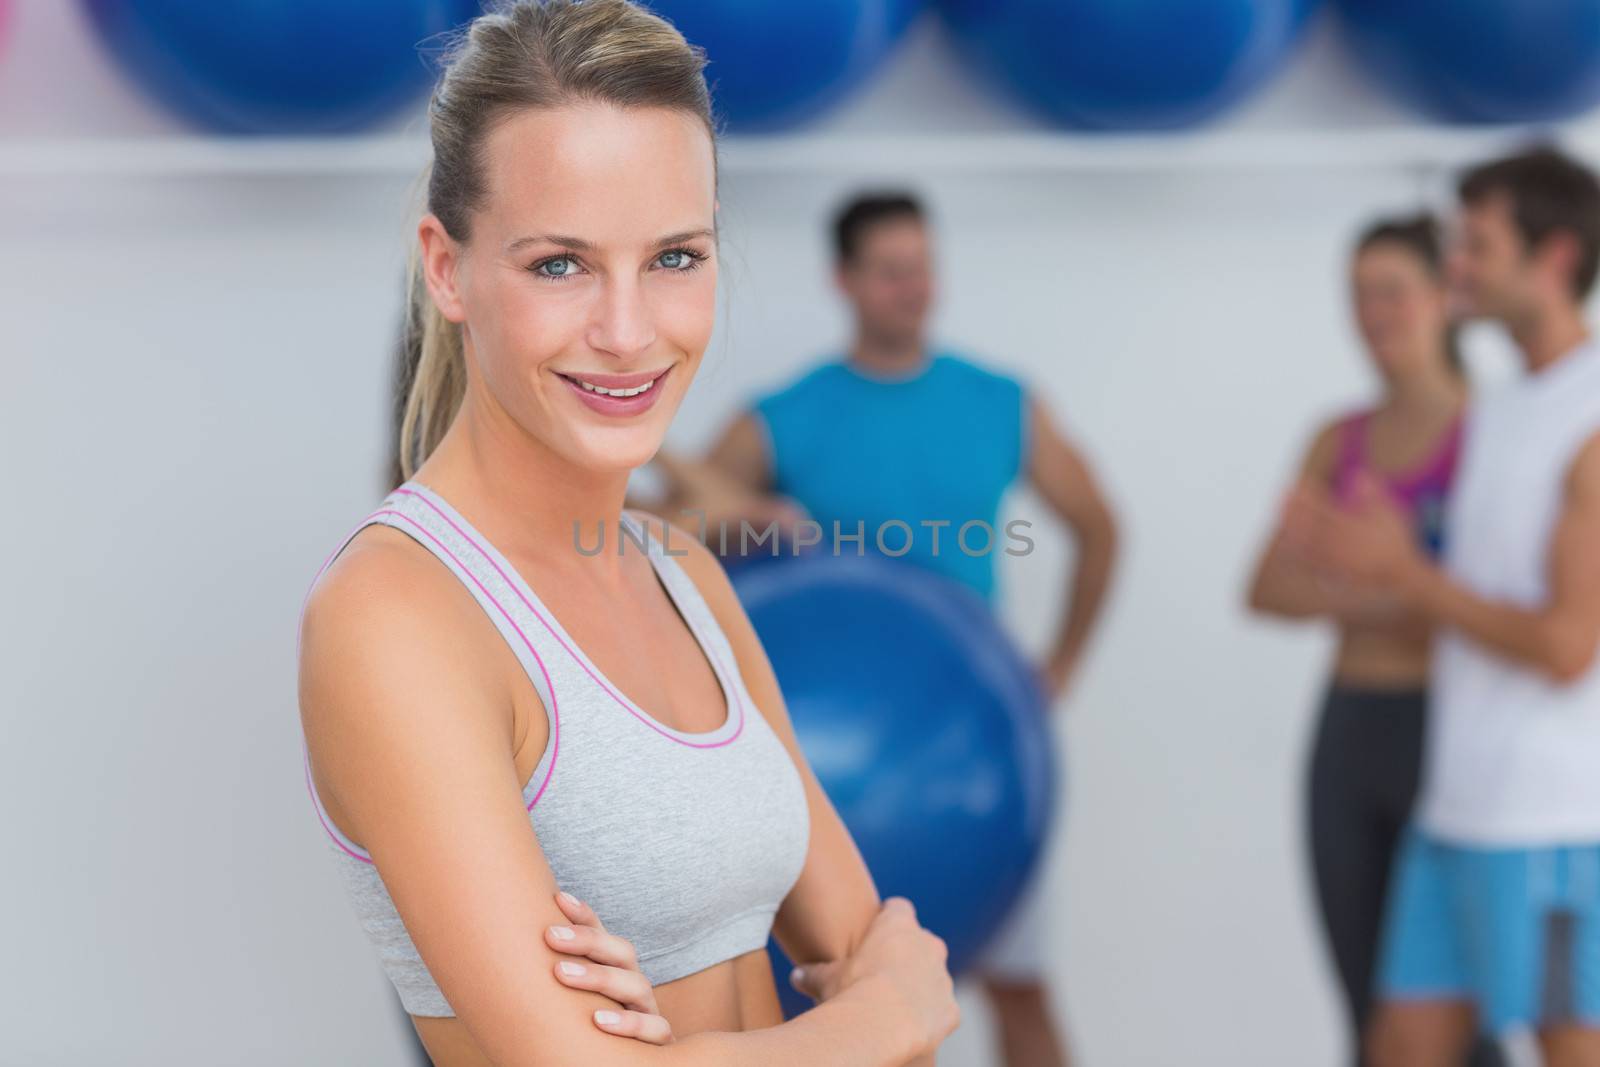 Portrait of a fit smiling young woman with friends in background at fitness studio